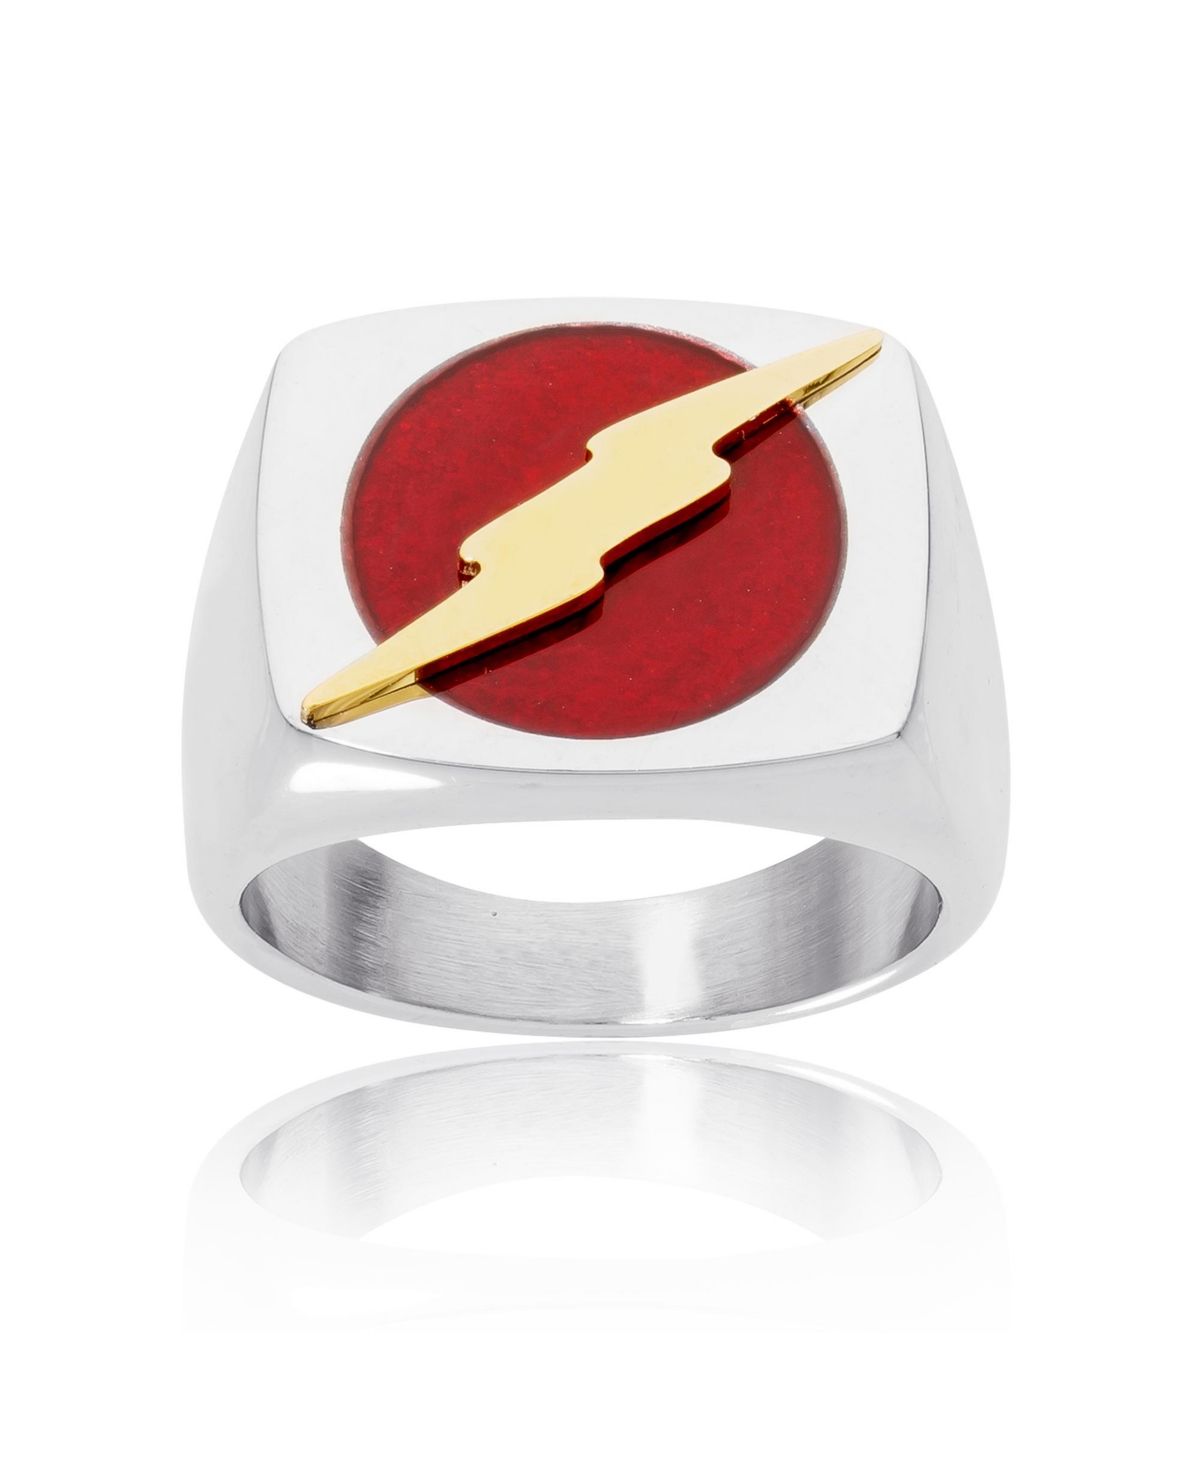 The Flash Stainless Steel (316L) Ring, Size 10 - Silver tone, red